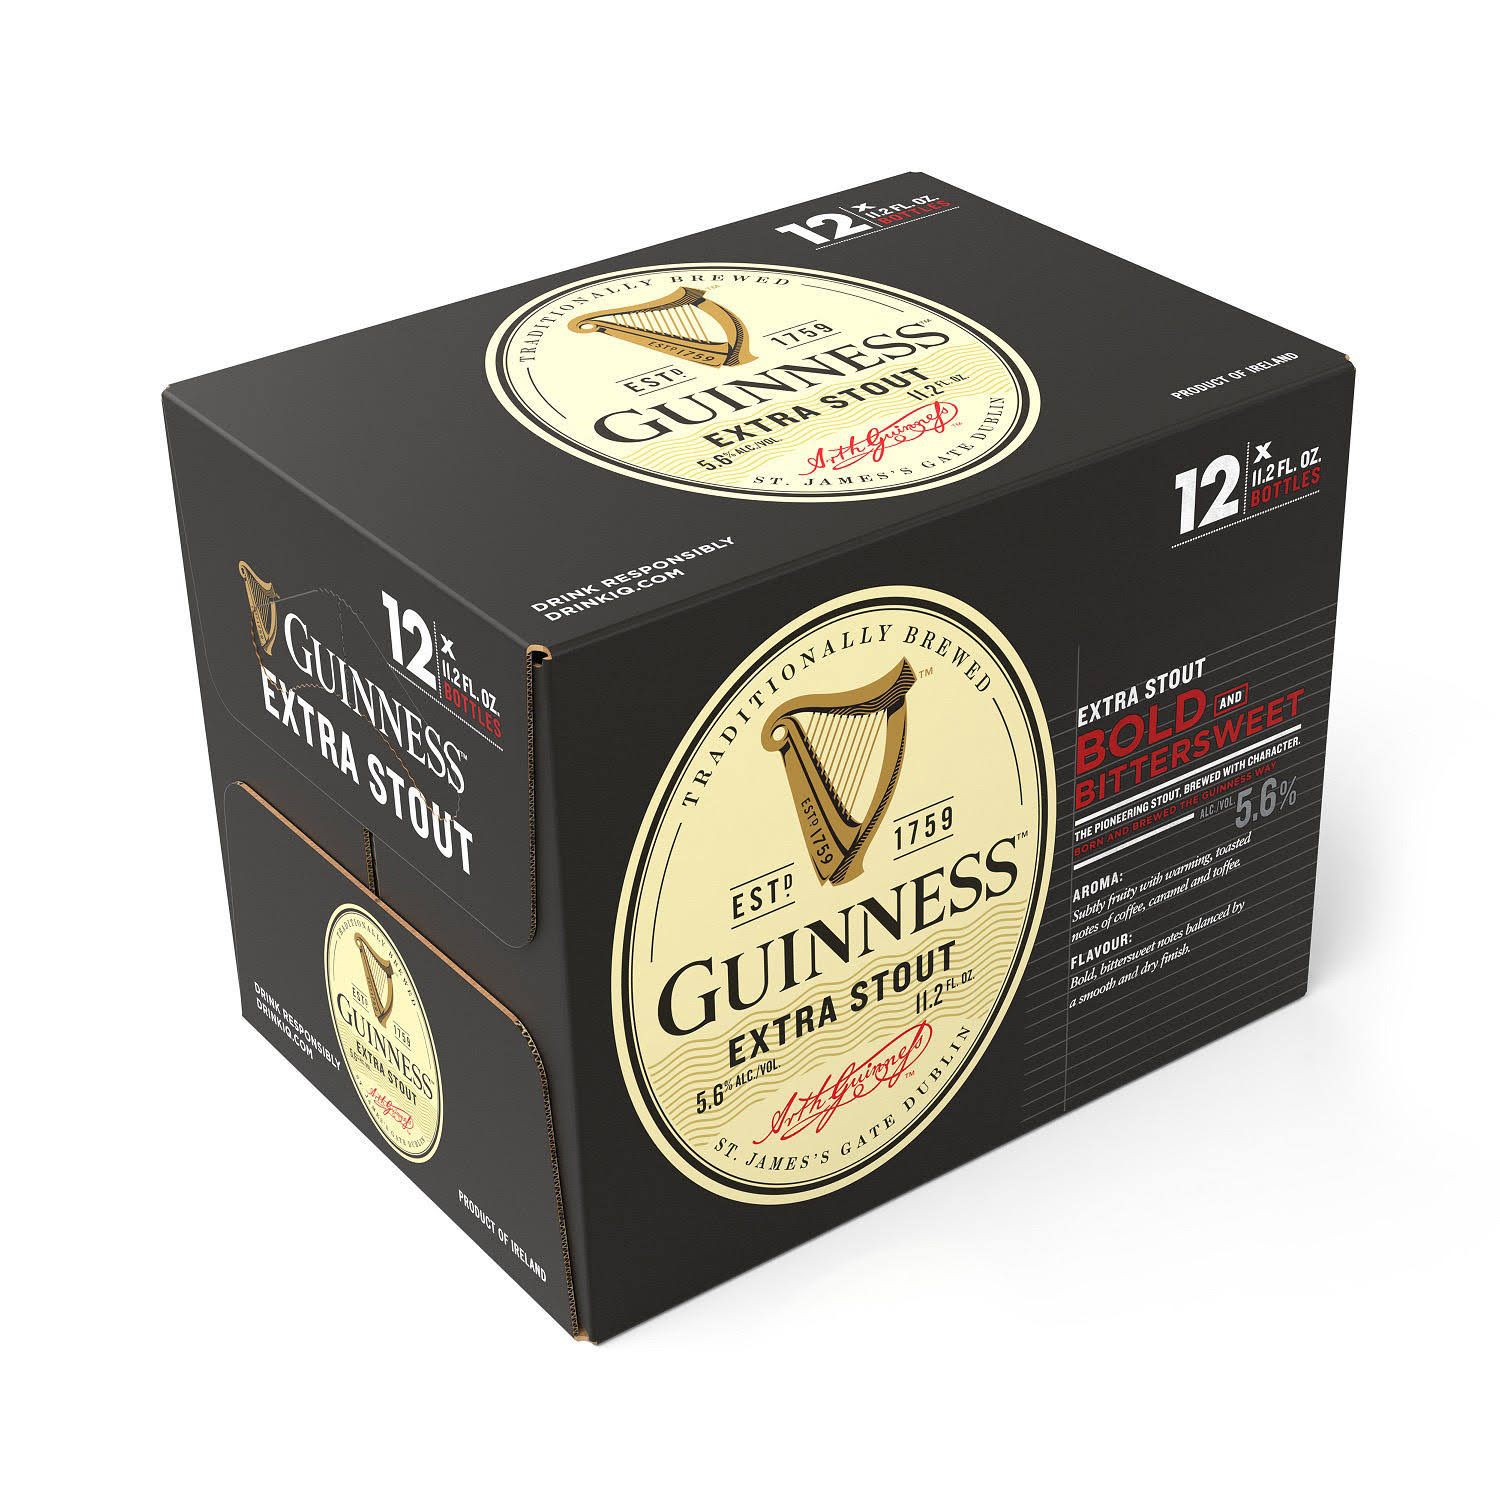 Guinness Beer, Extra Stout, Bold and Bittersweet - 12 pack, 11.2 fl oz bottles